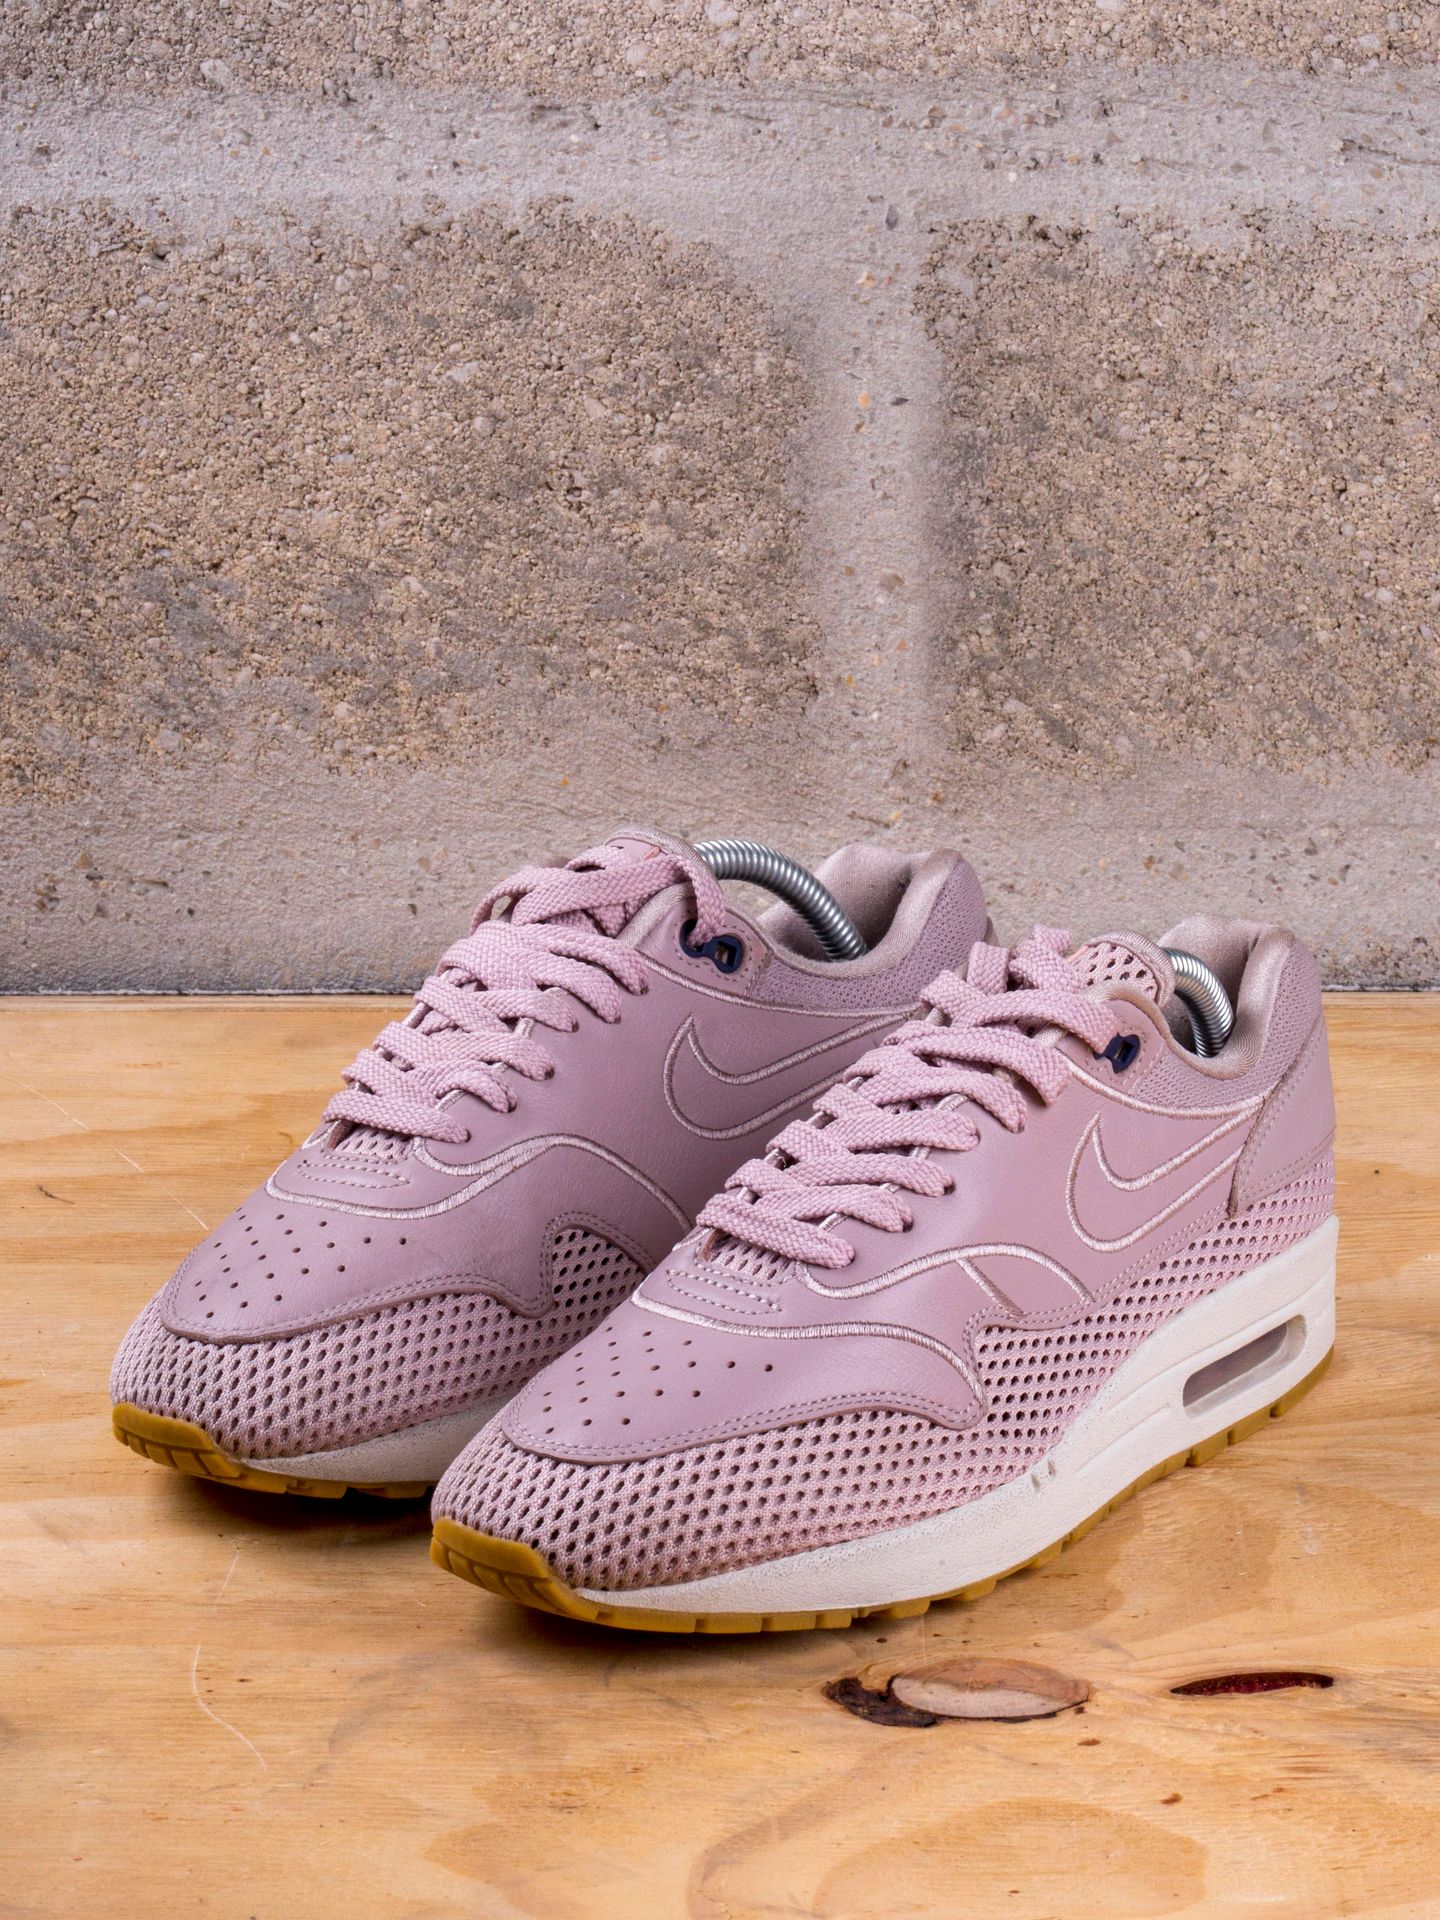 Null NIKE AIR MAX 1

SI Pink Particle (W)

(AO2366-600)

US 9 F / EU 40,5

(Very&hellip;